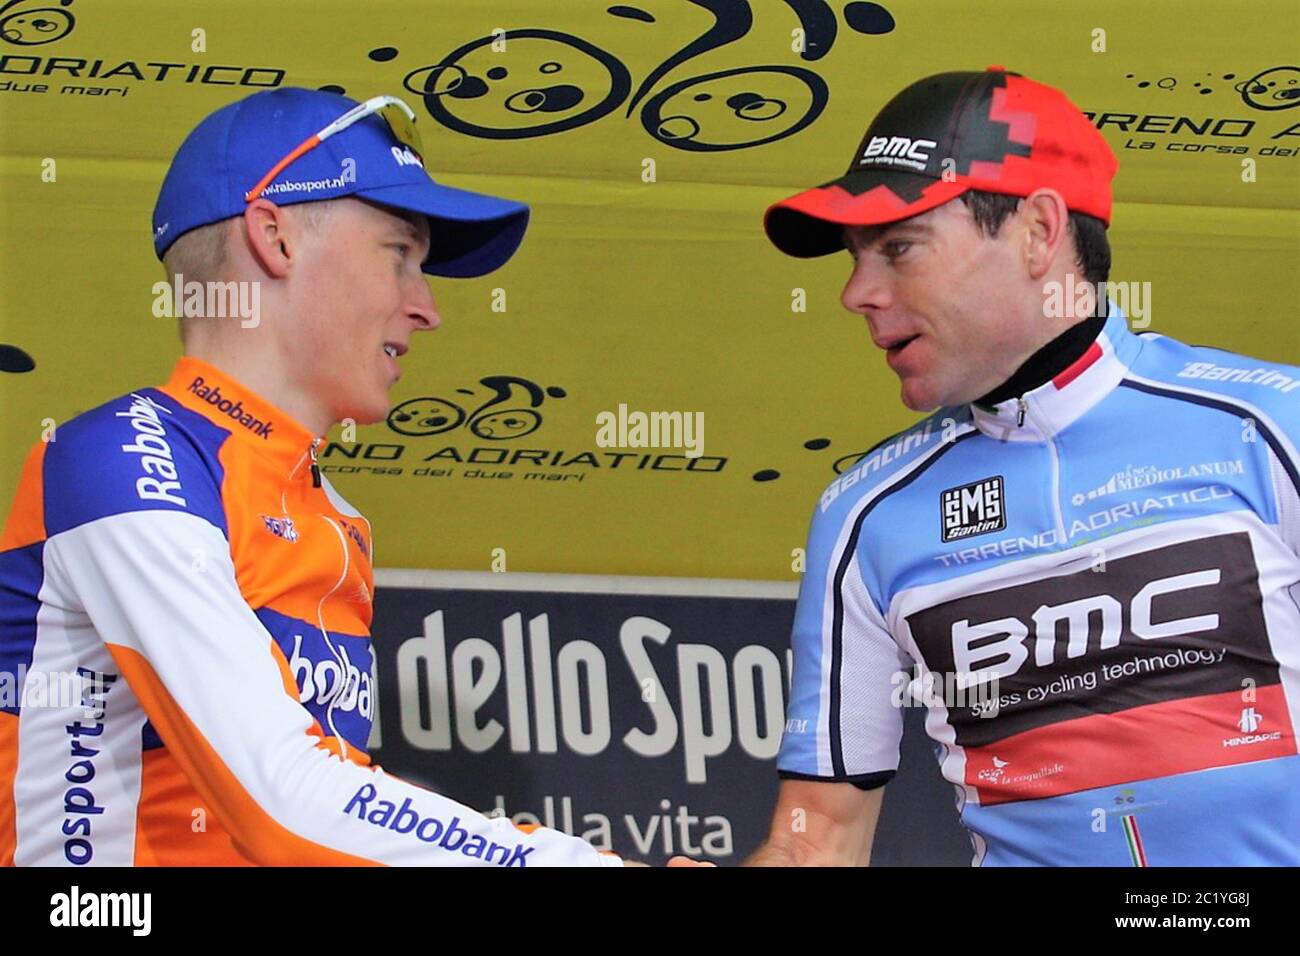 Robert Gesink of Rabobank Cycling Team and Cadel Evans of BMC Racing Team  during the Tirreno Adriatico  2011, Stage 7 cycling race,San Benedetto (ITT) (9.3k Km) on March15, 2011 in San Benedetto, Italie - Photo Laurent Lairys / DPPI Stock Photo